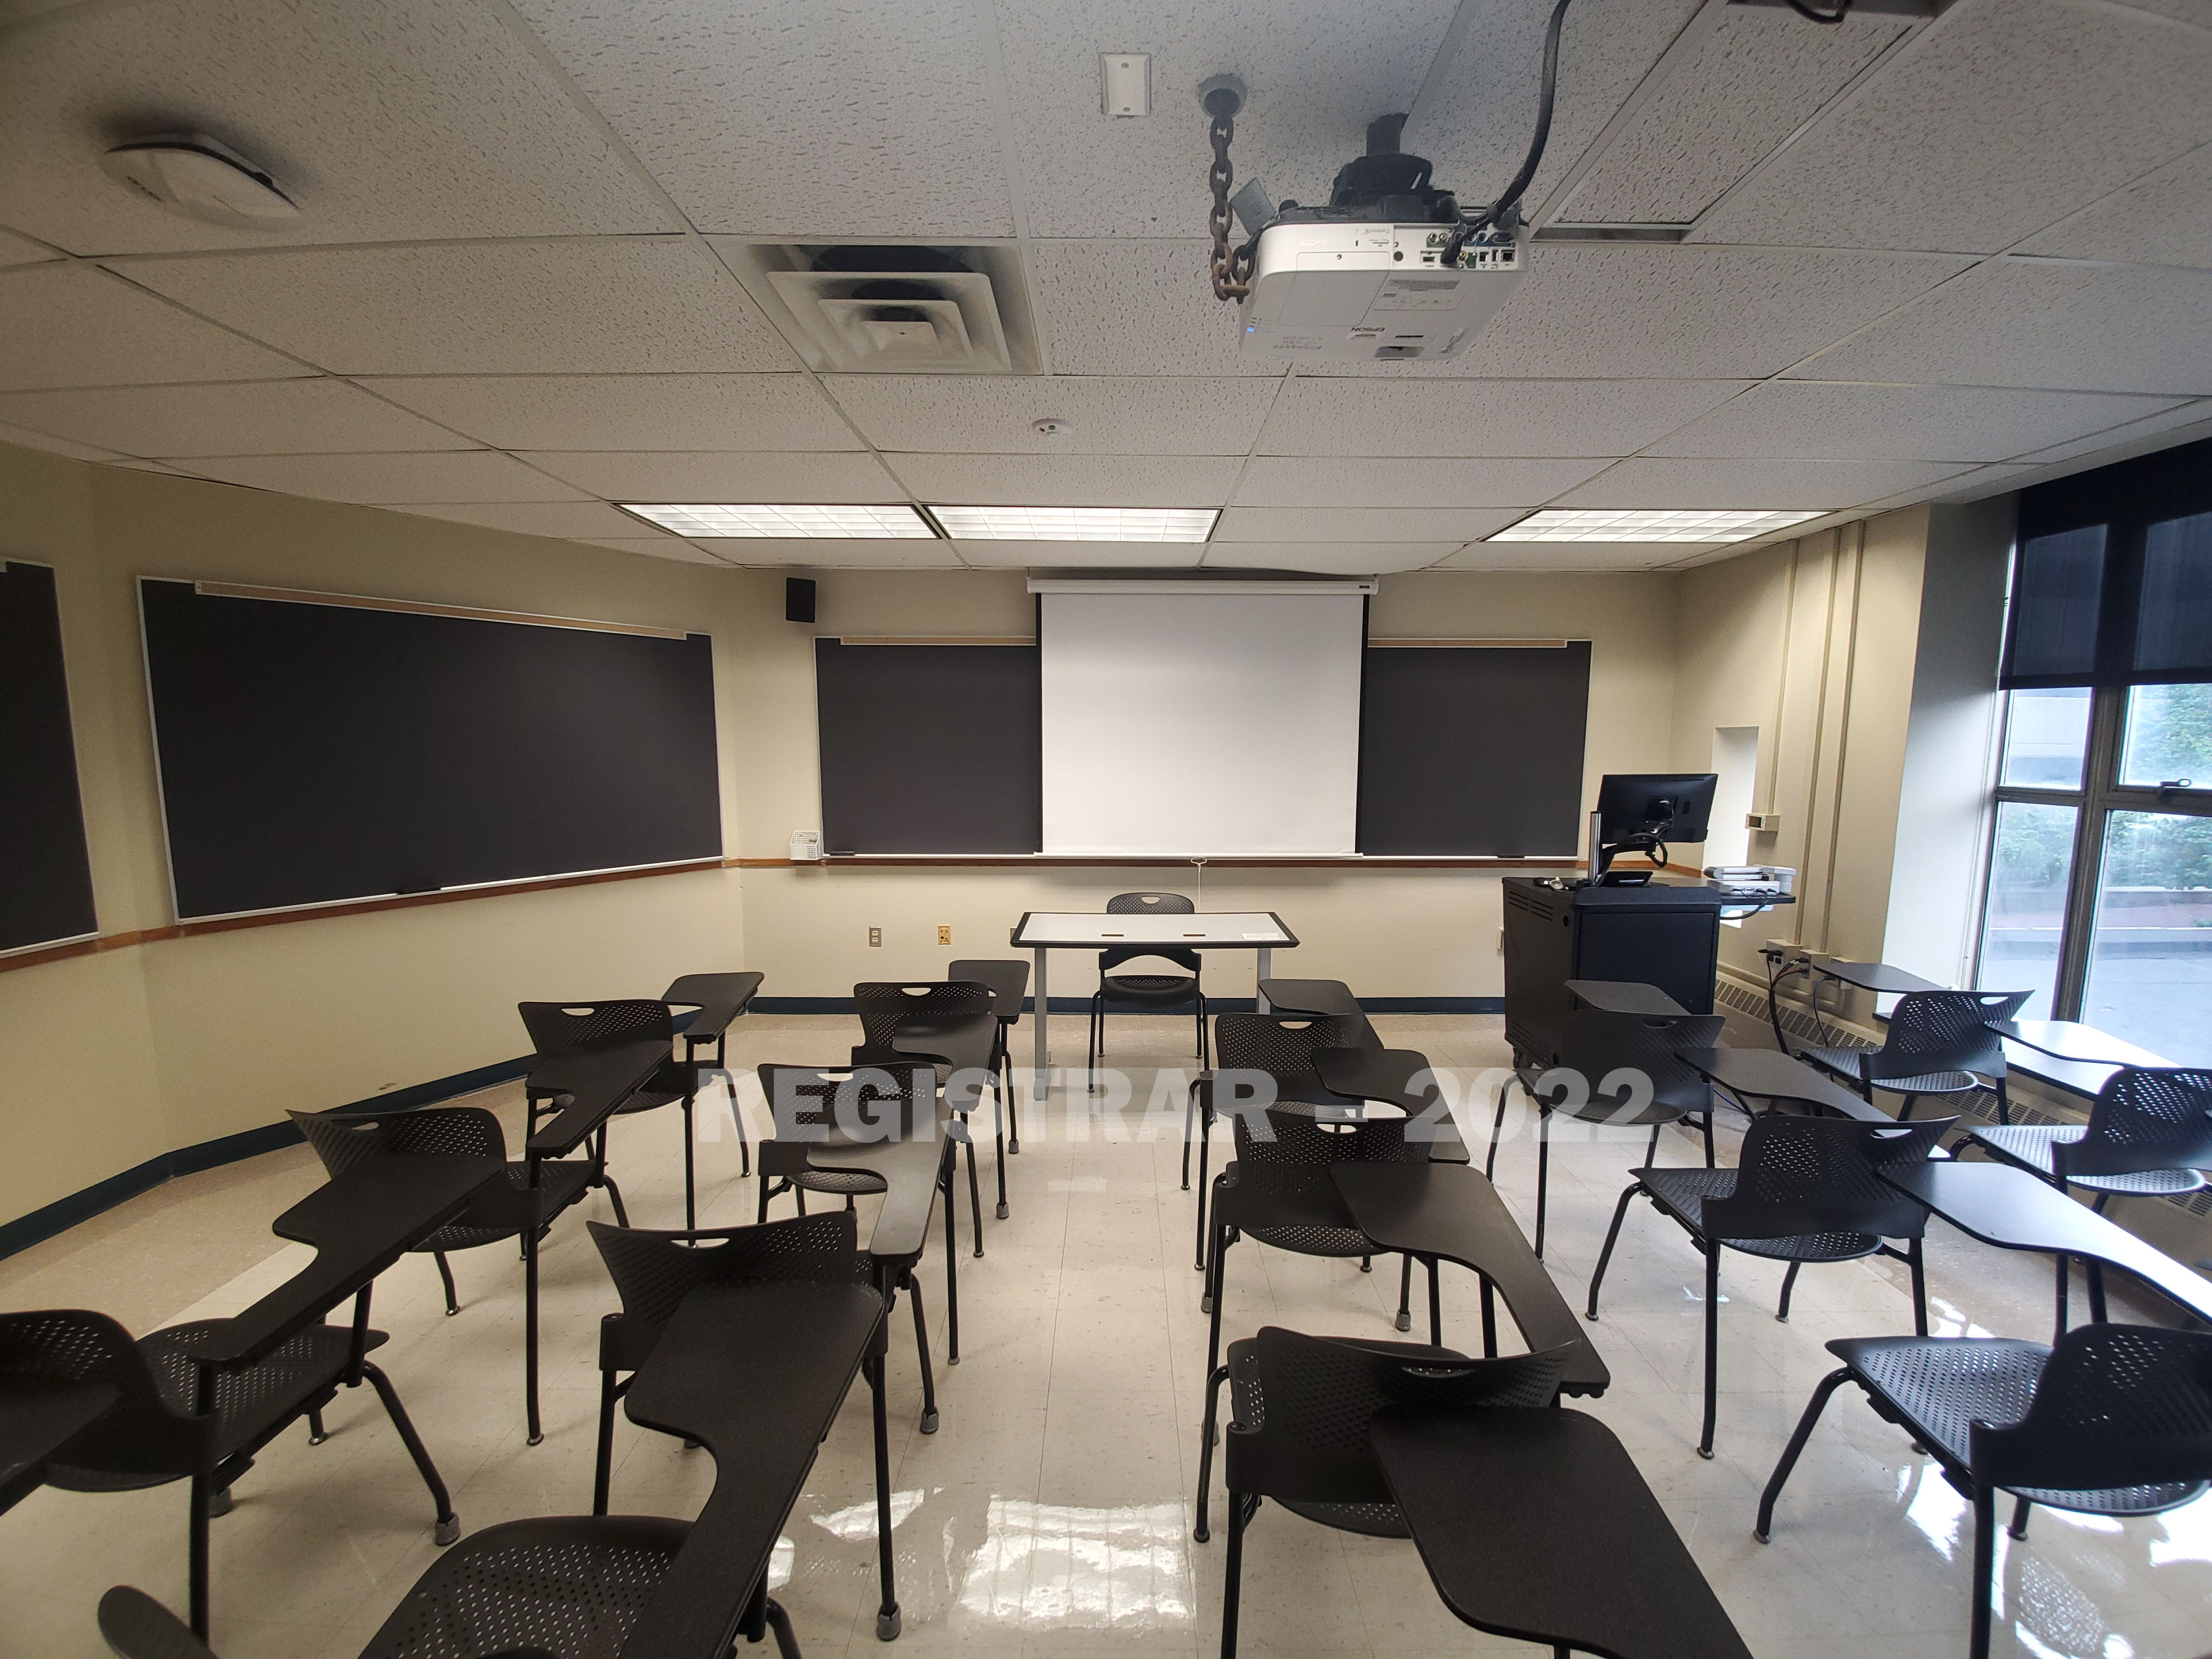 Enarson Classroom Building room 218 ultra wide angle view from the back of the room with projector screen down